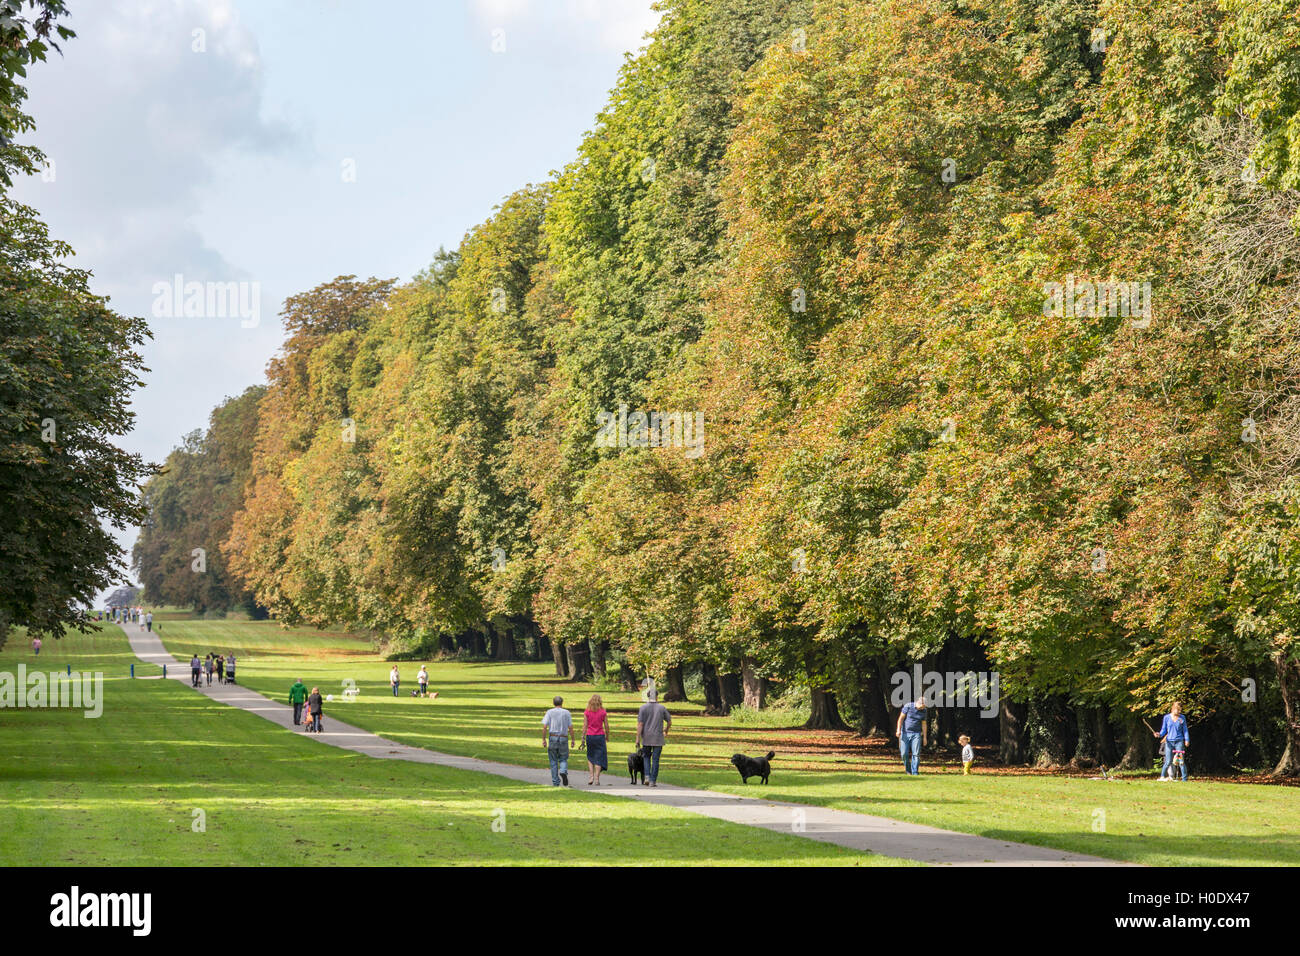 A late summer walk in Cirencester Park, Cirencester, Gloucestershire, England, UK Stock Photo